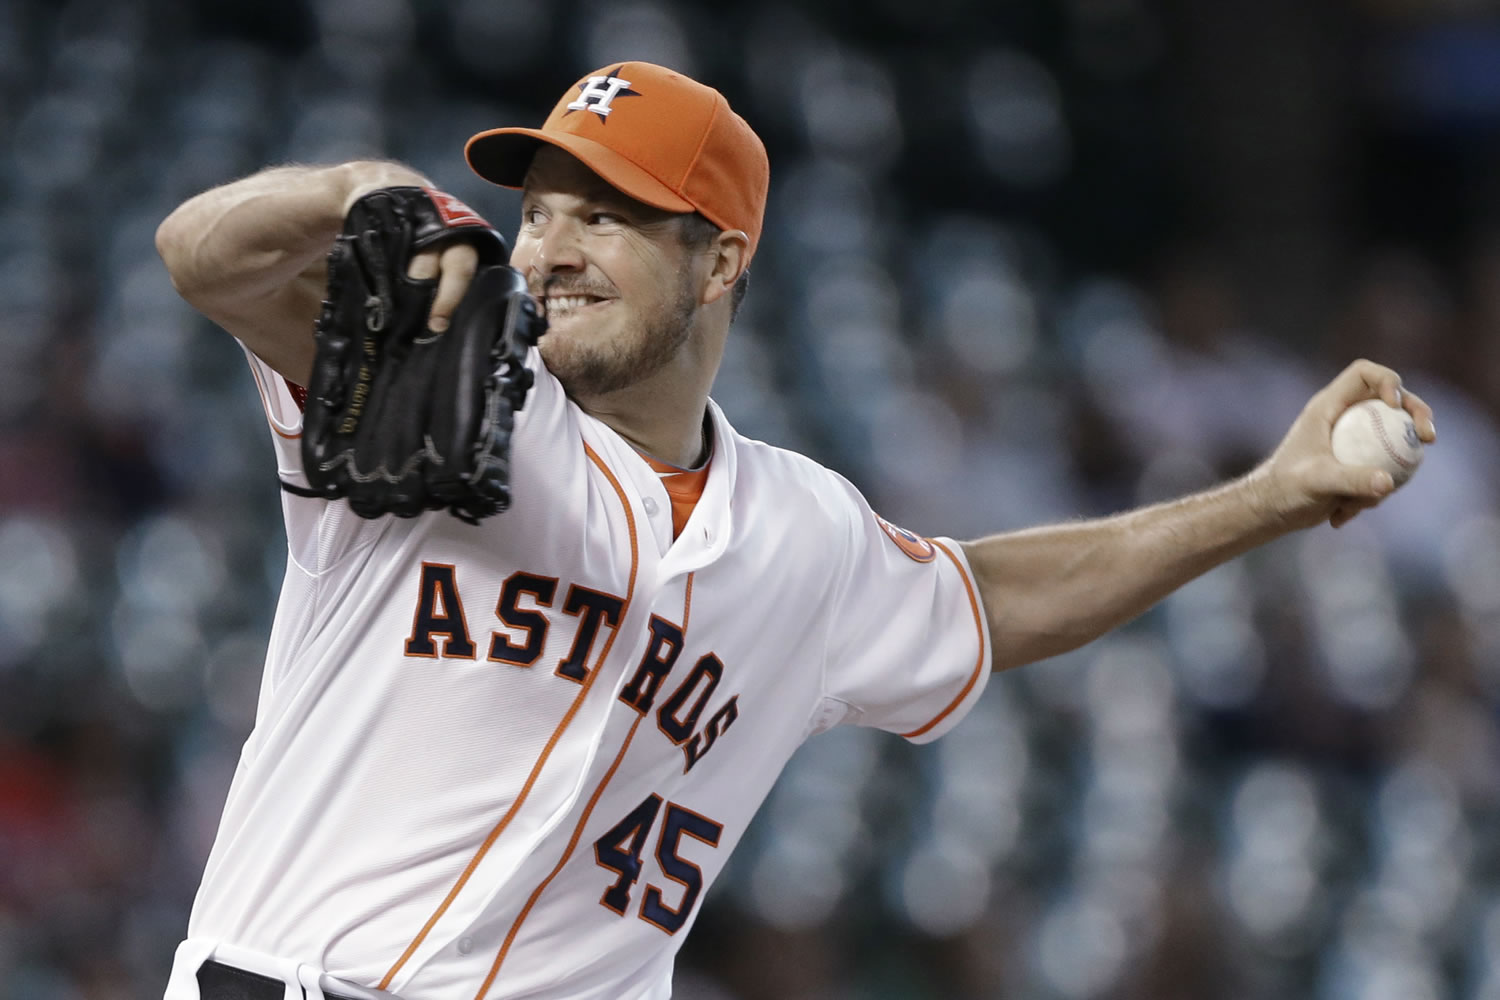 Houston Astros Erik Bedard is just sixth pitcher, dating back to 1916, to give up no hits over at least 6 innings pitched and allow two or more runs.